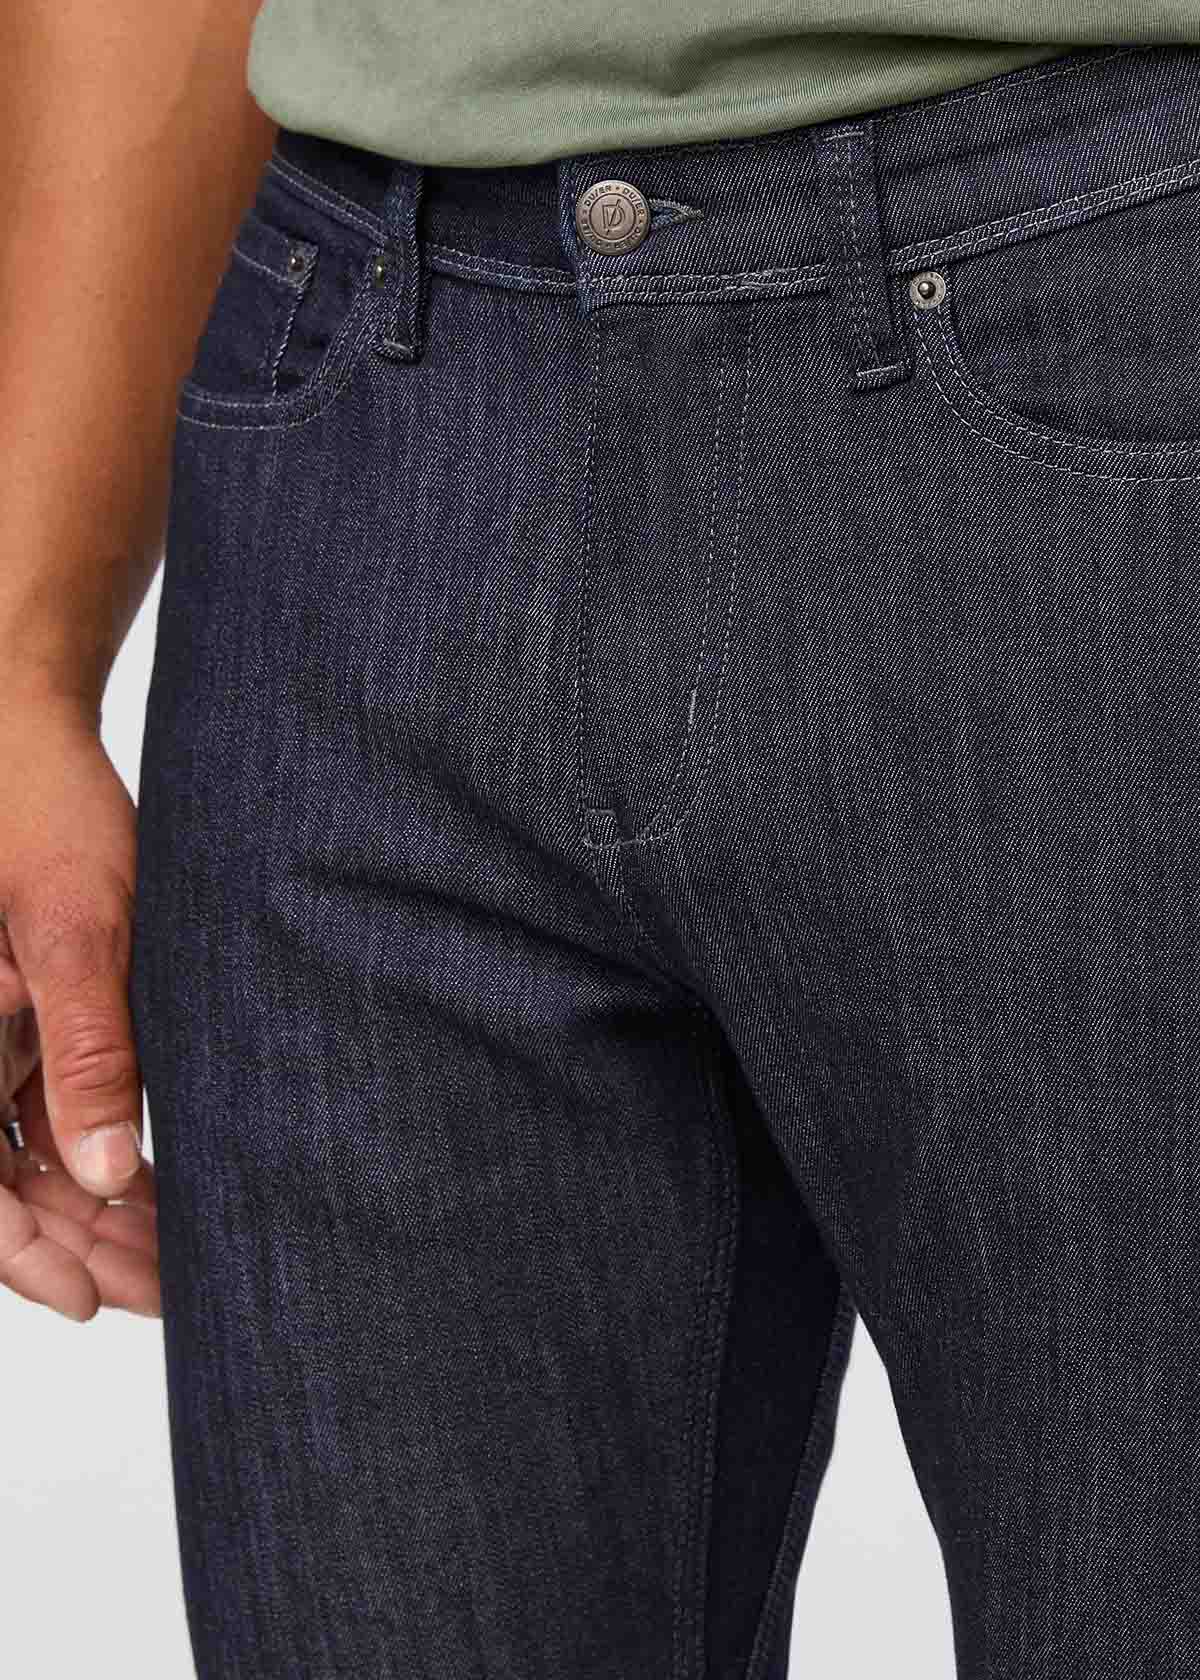 Men's Dark Wash Jeans, The Perfect Fit